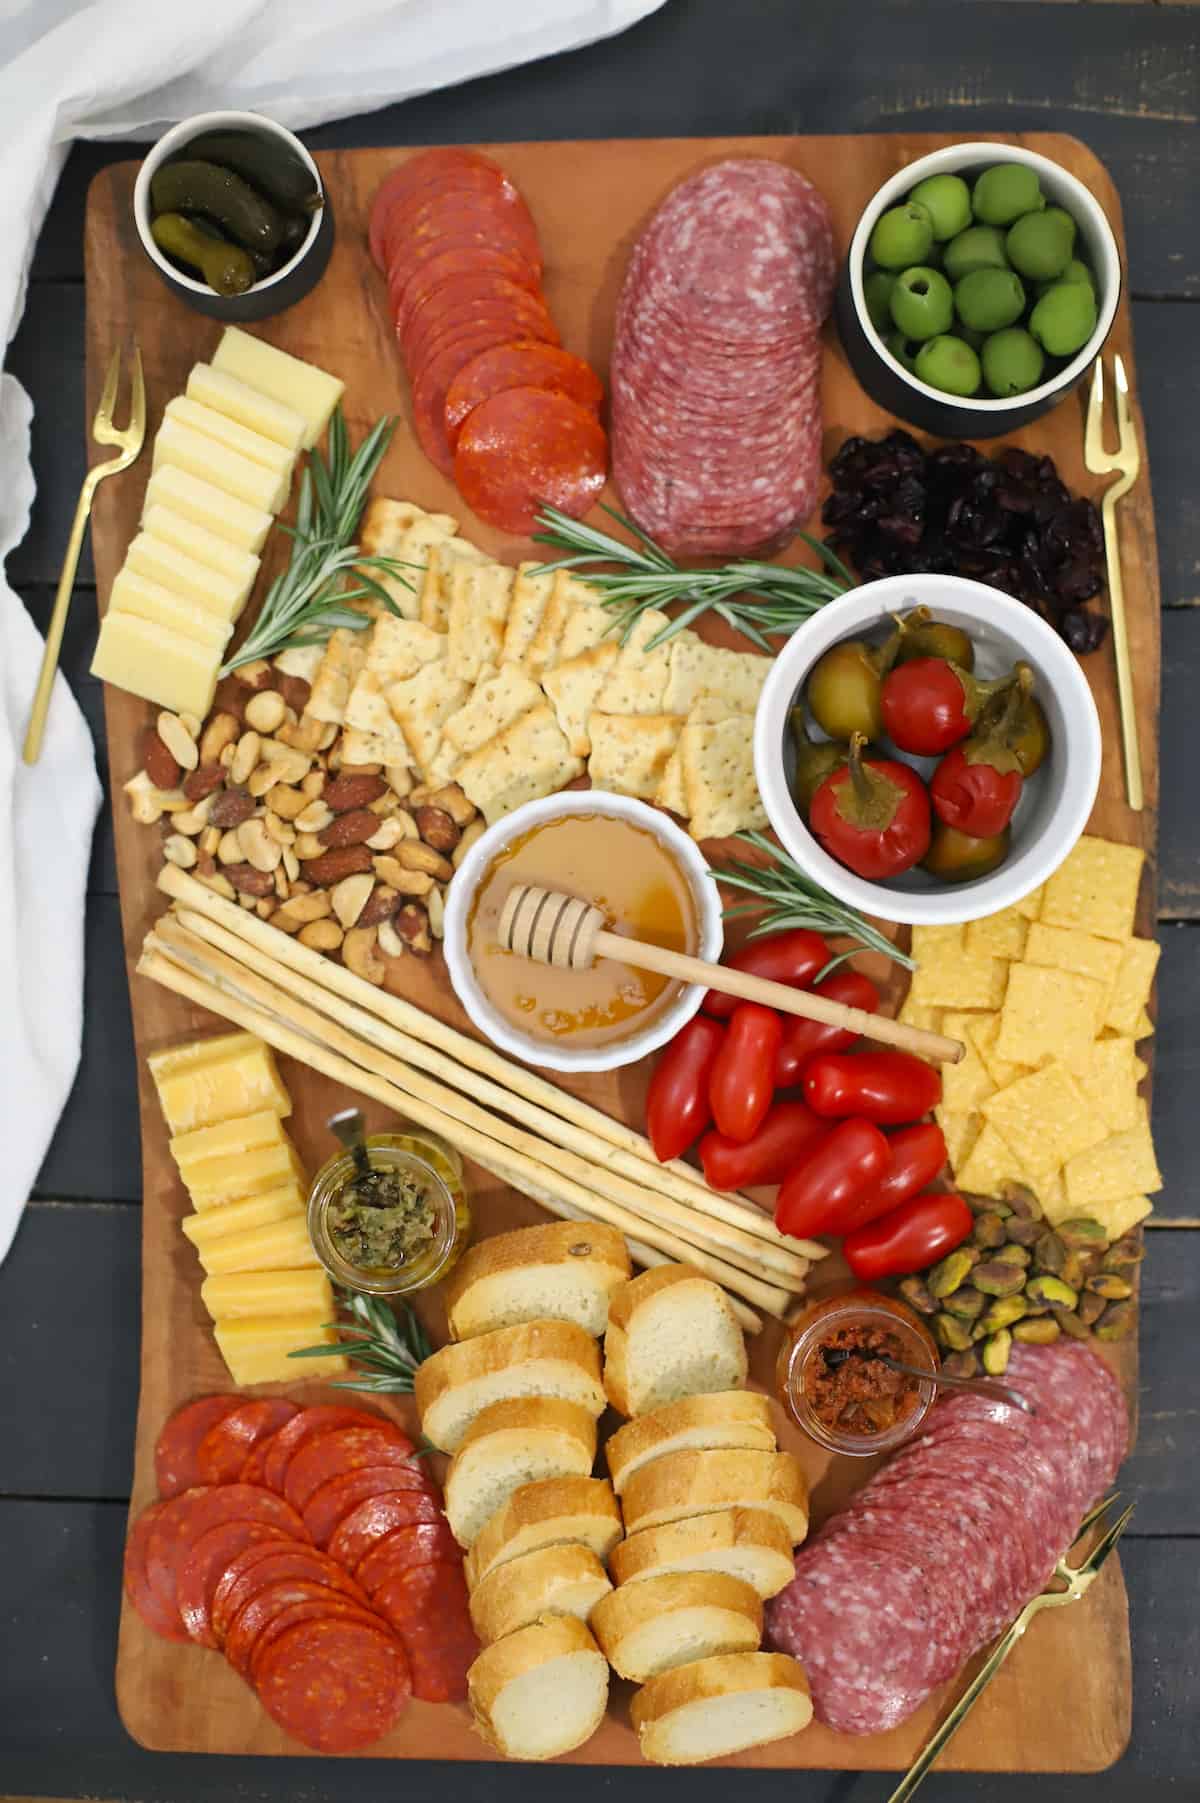 Charcuterie board with salame, pepperoni, cheeses, spreads, nuts, pickles, olives, and rosemary.